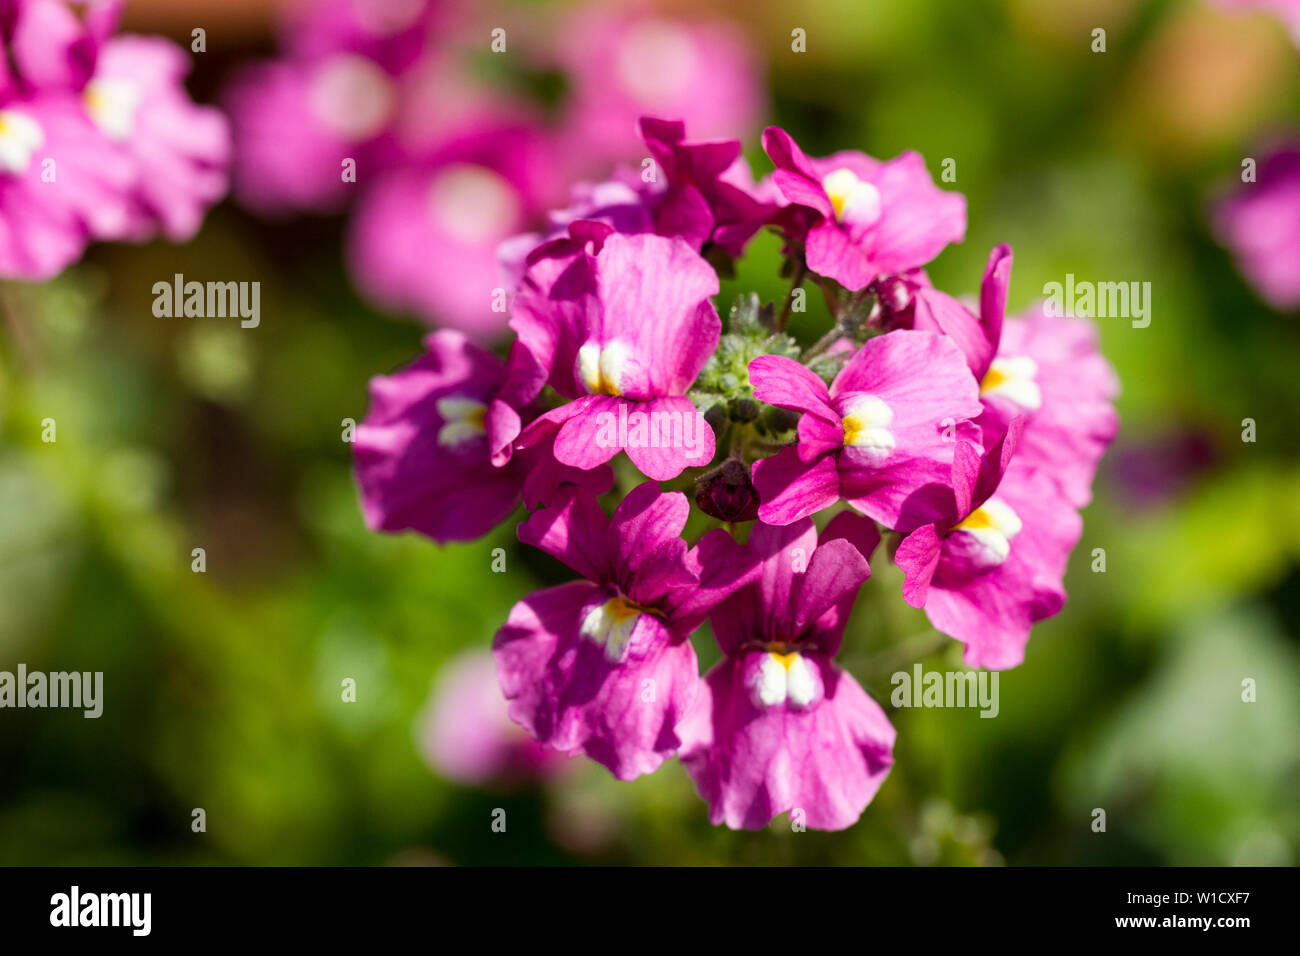 Closeup of some Nemesia flowers in summer, United Kingdom Stock Photo